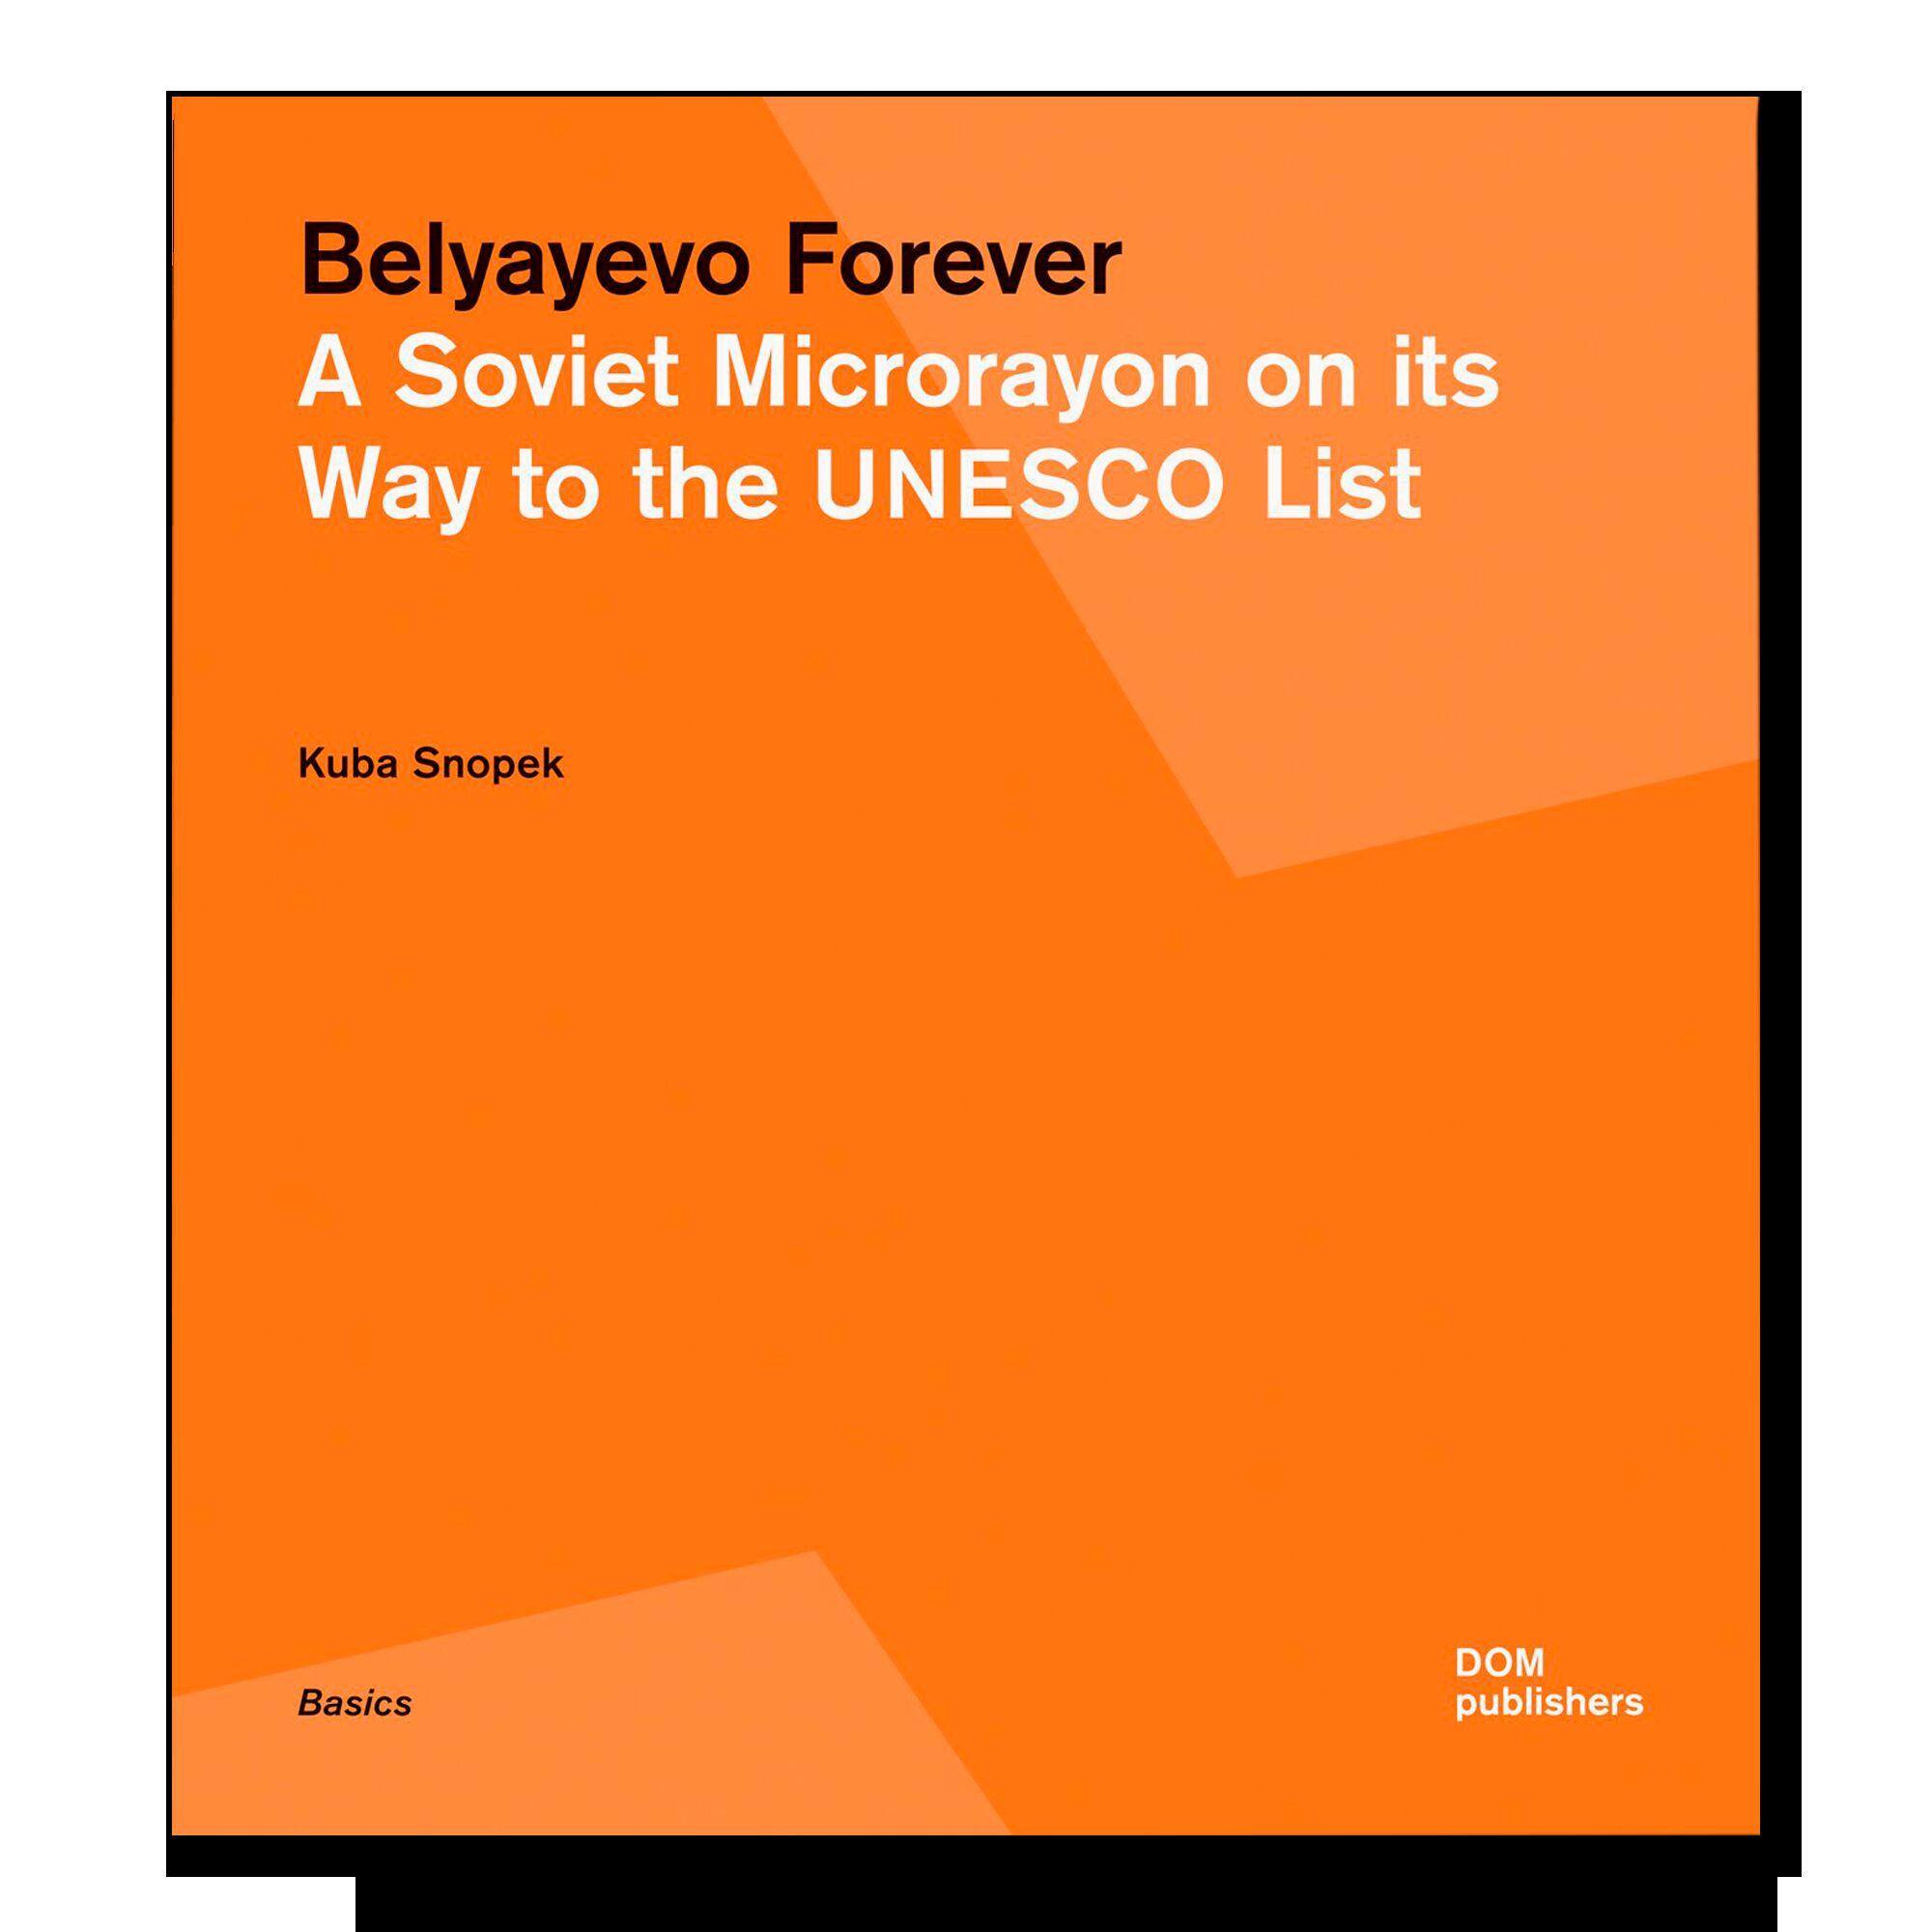 Belyayevo Forever: A Soviet Microrayon on its Way to the UNESCO List